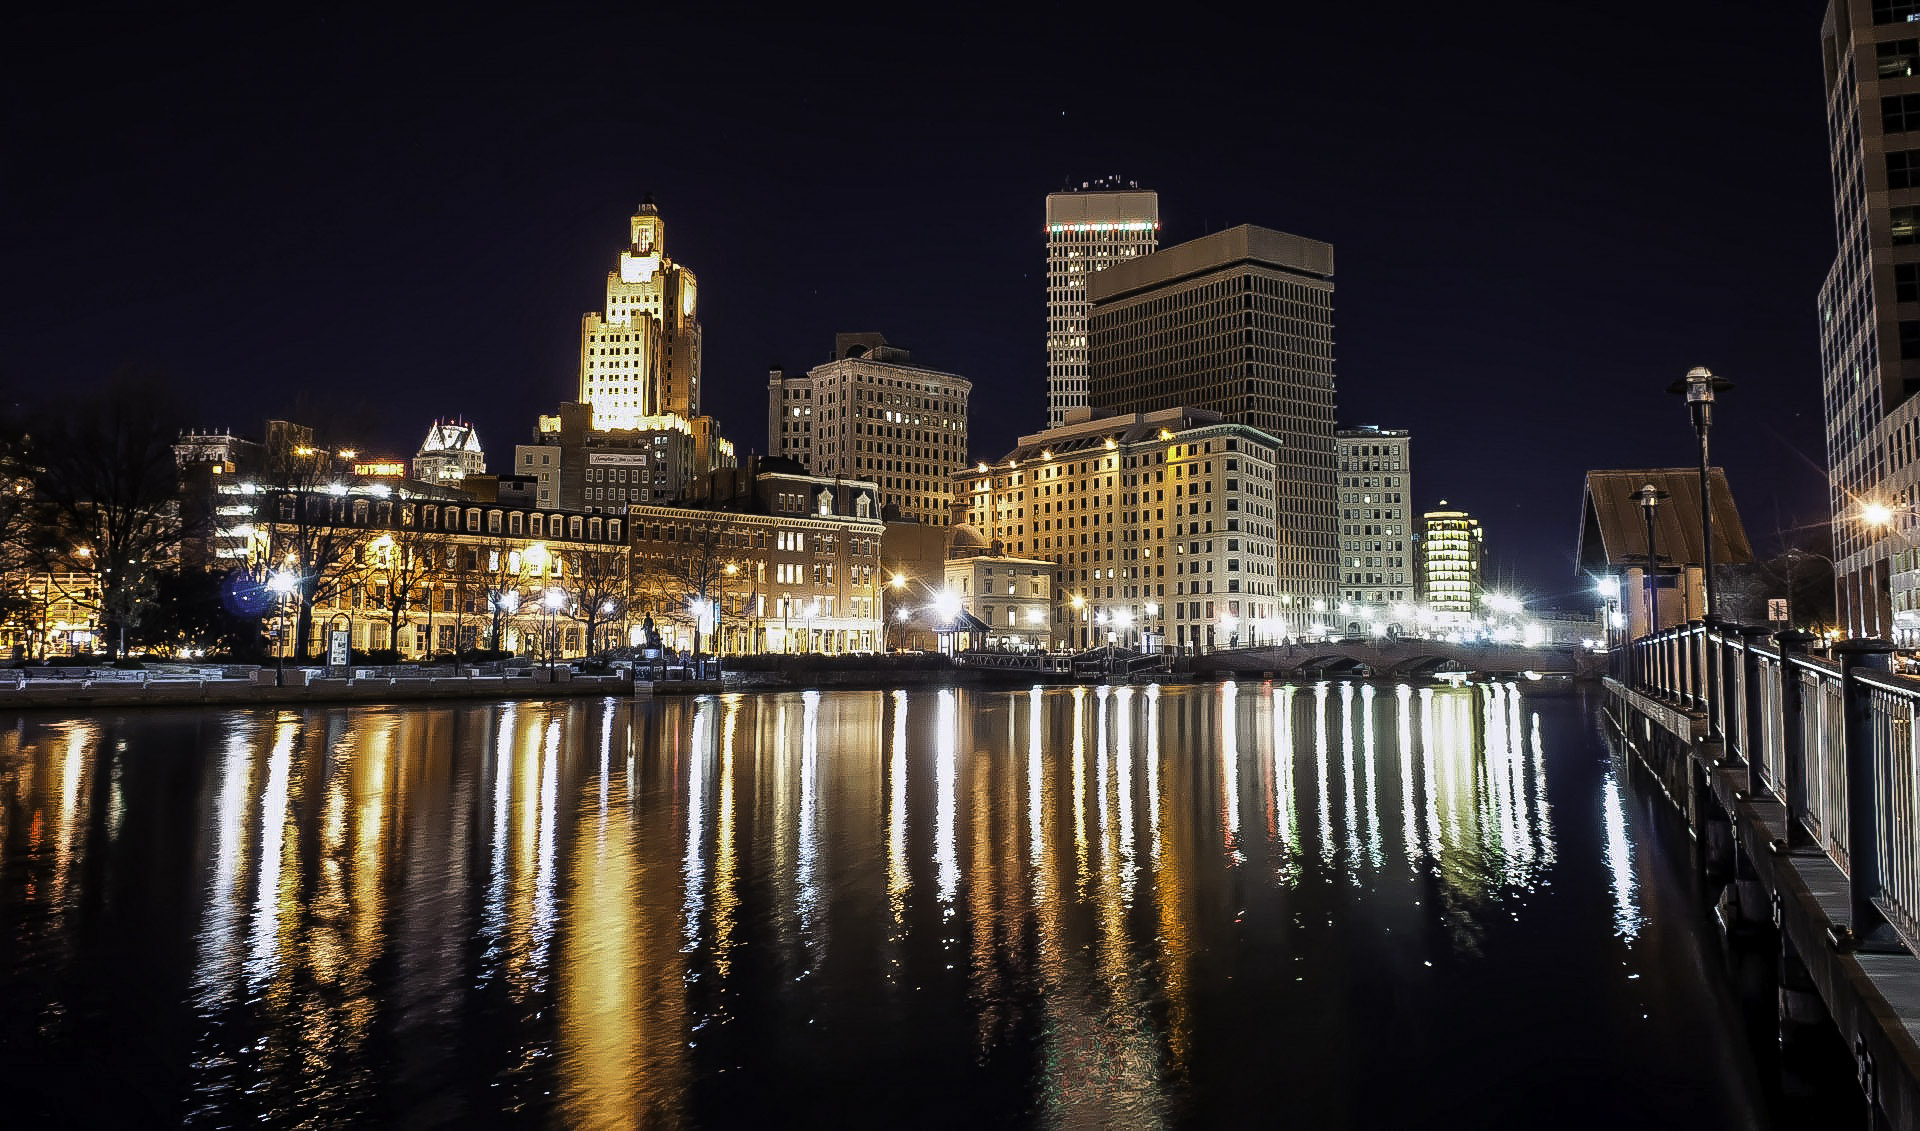 Skyline of Providence, Rhode Island at nighttime over the water image